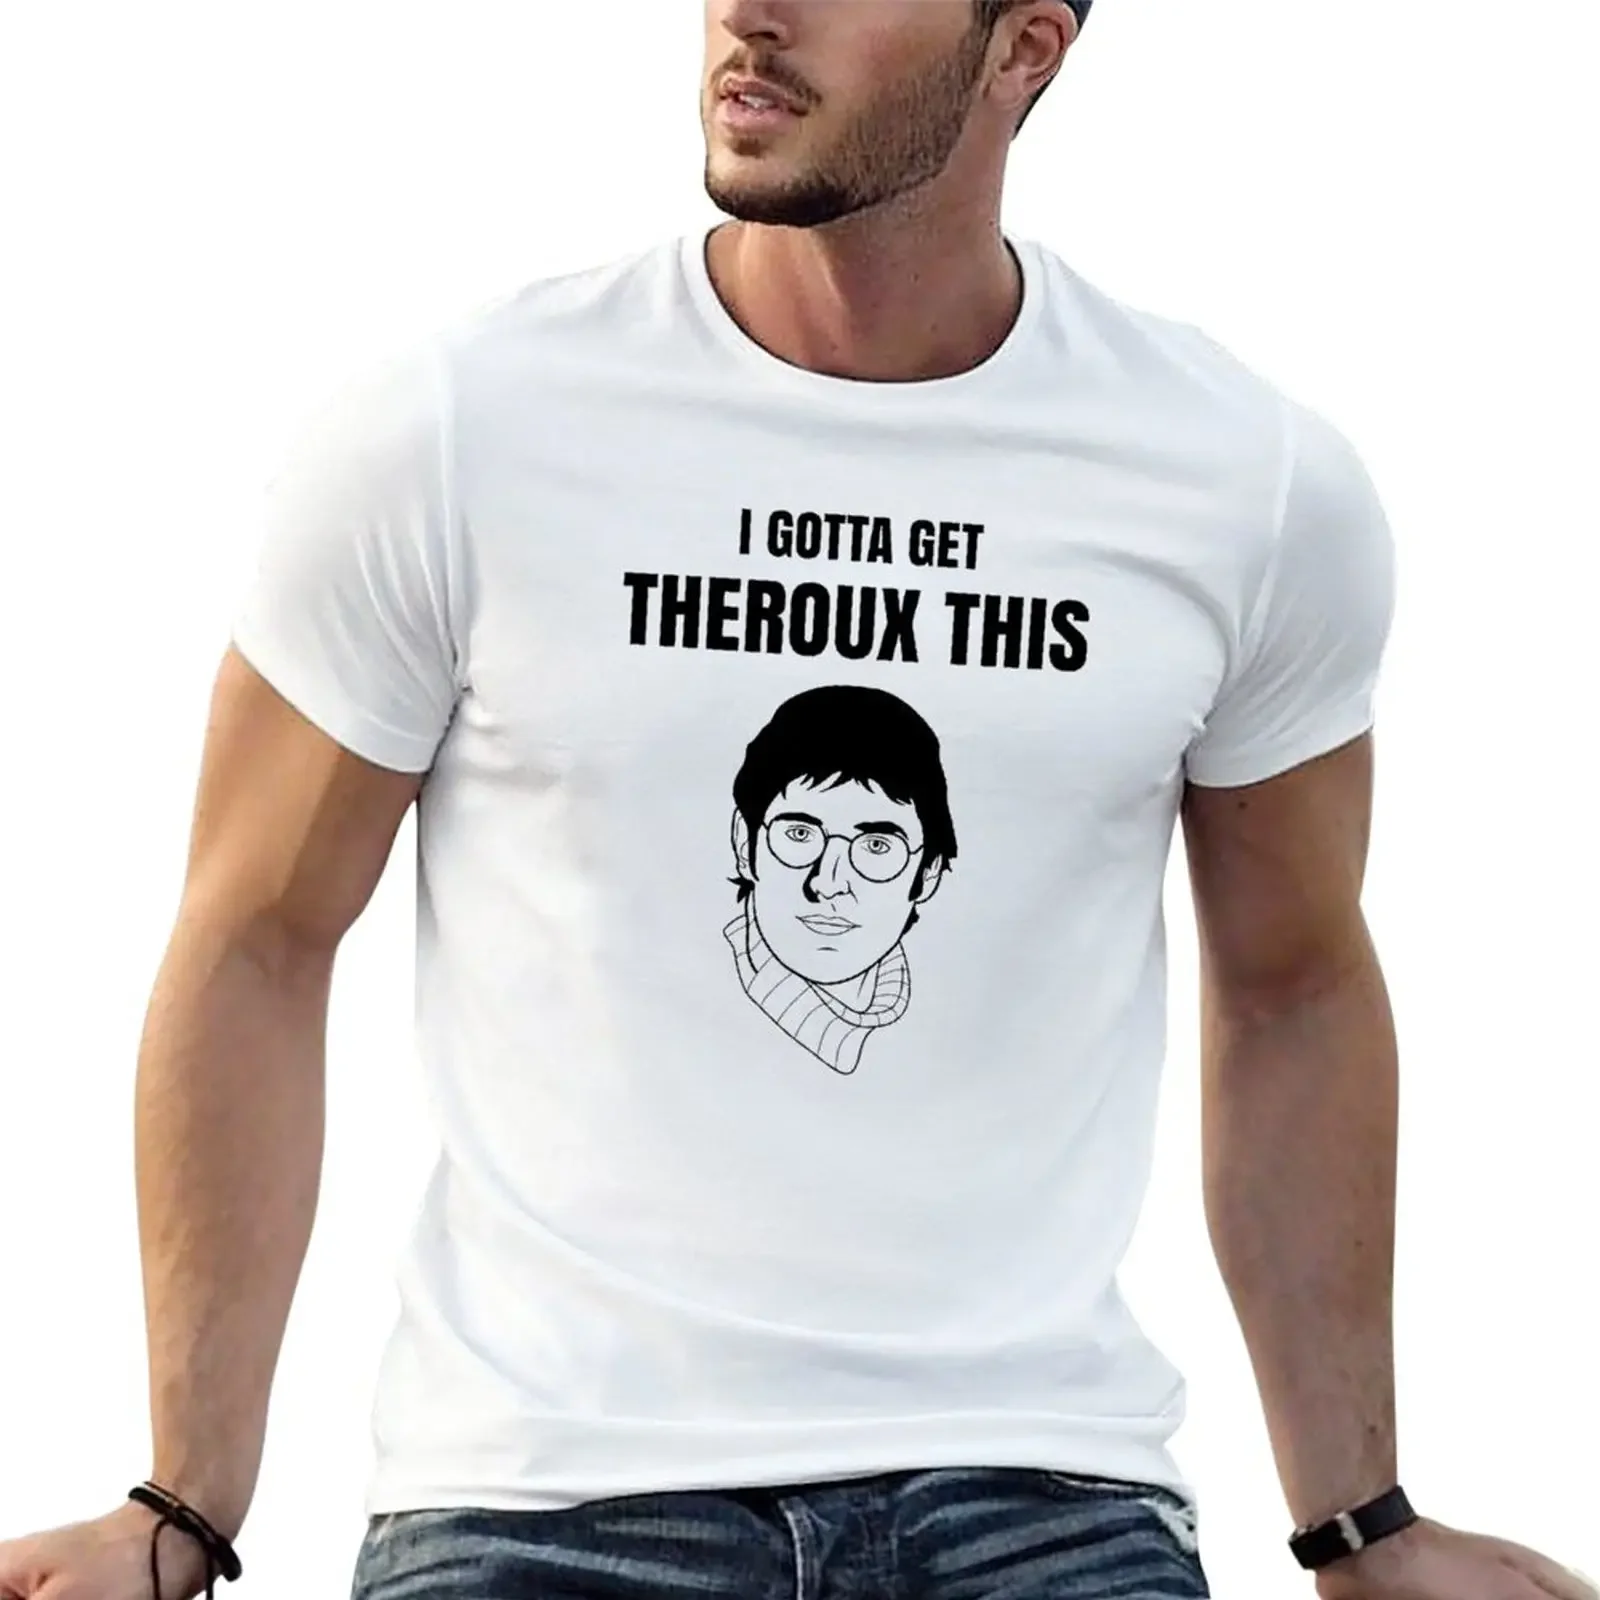 

Gotta get theroux this T-Shirt aesthetic clothes plus sizes summer top fitted t shirts for men